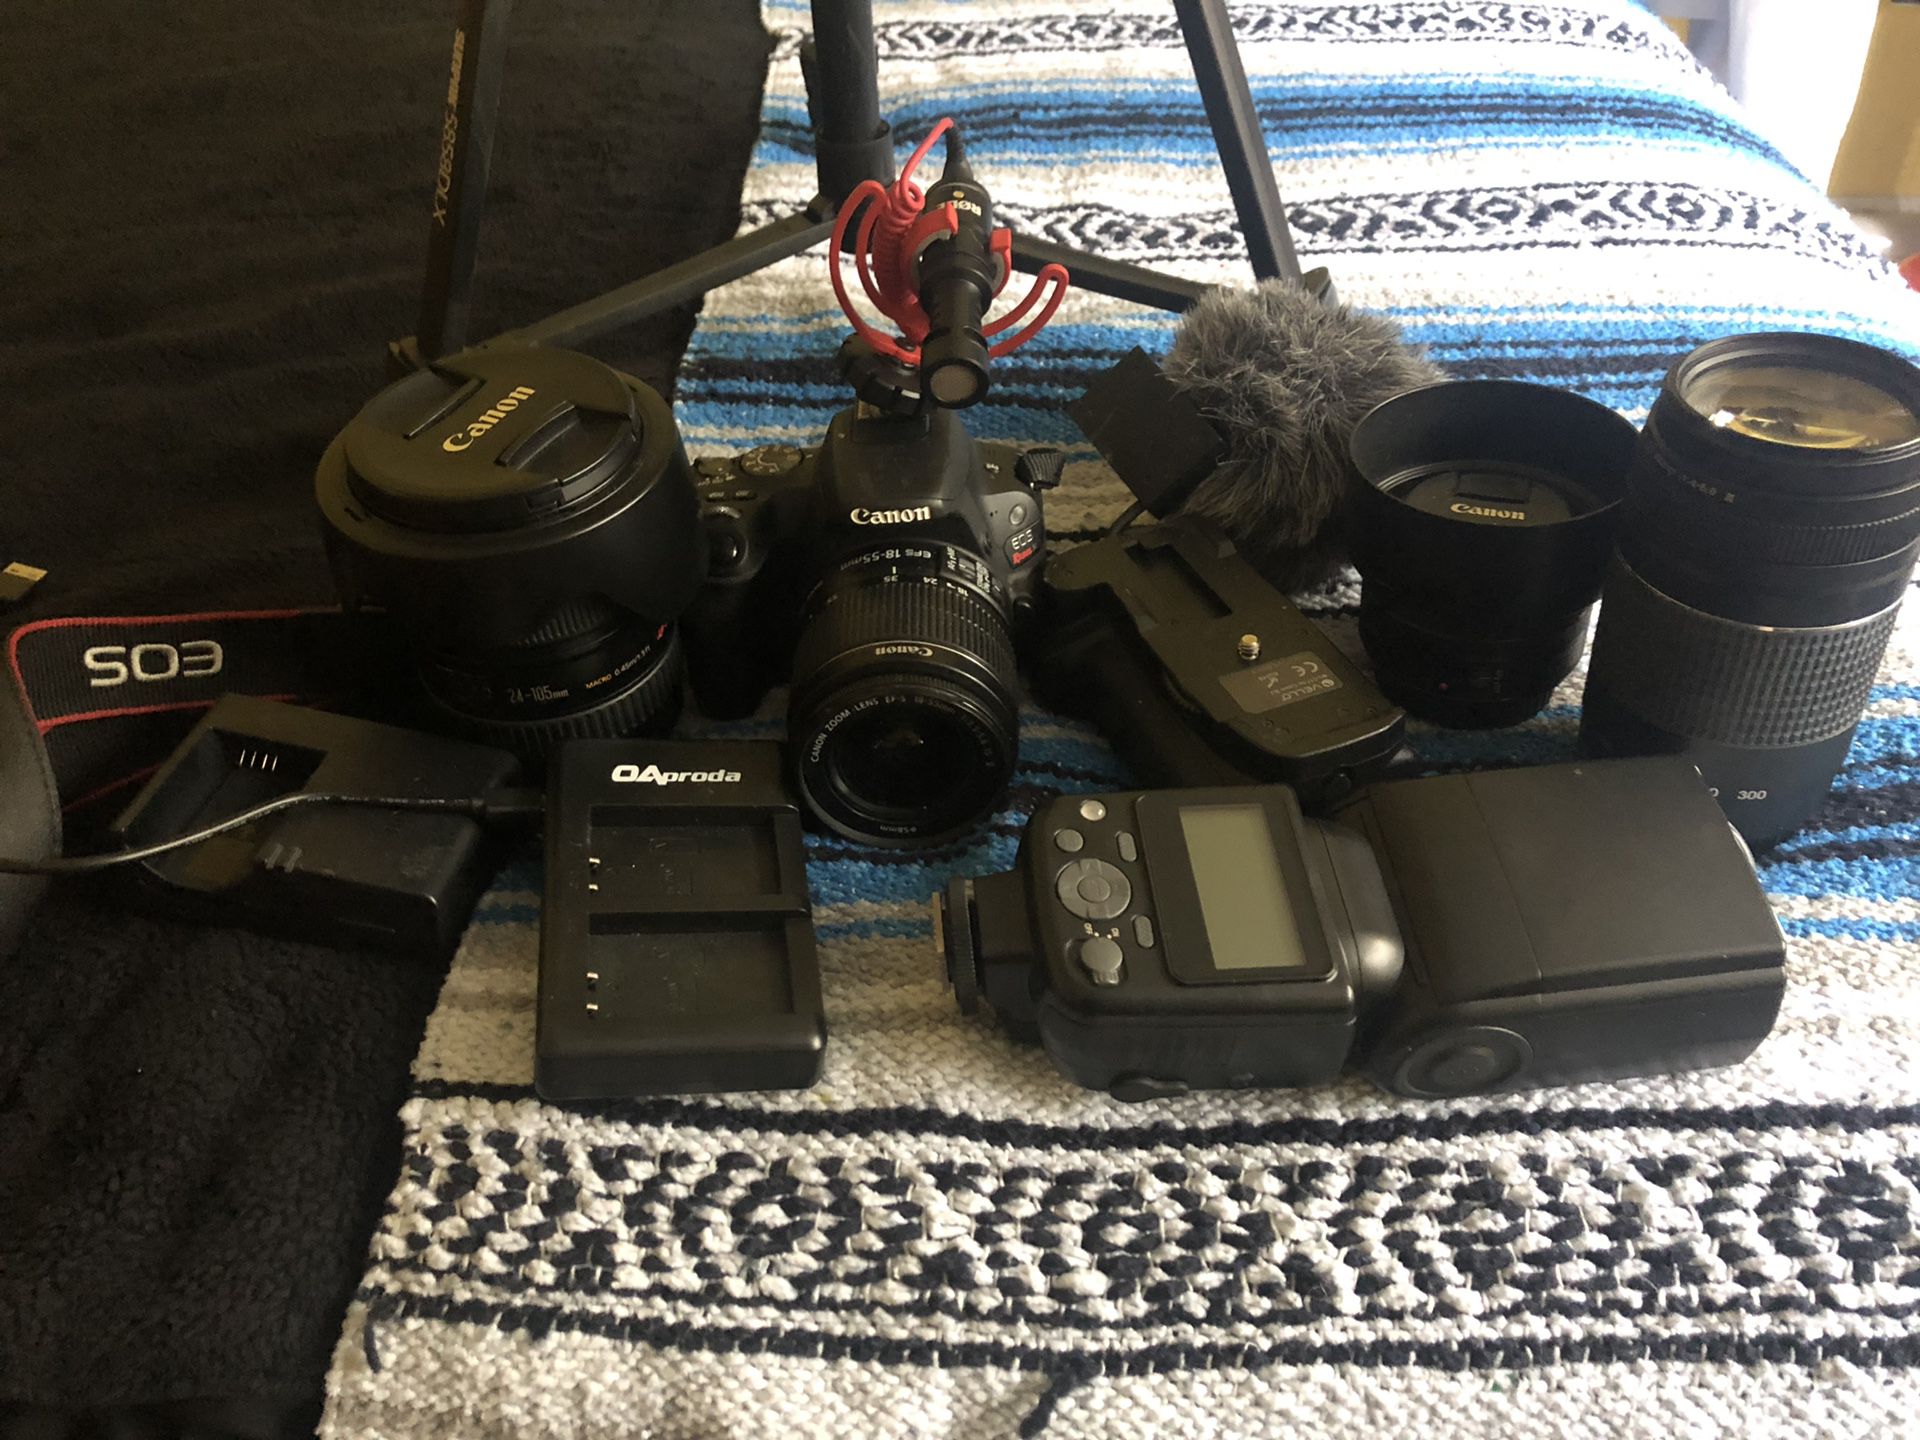 Beginner Video kit Canon SL2( willing to sell separate